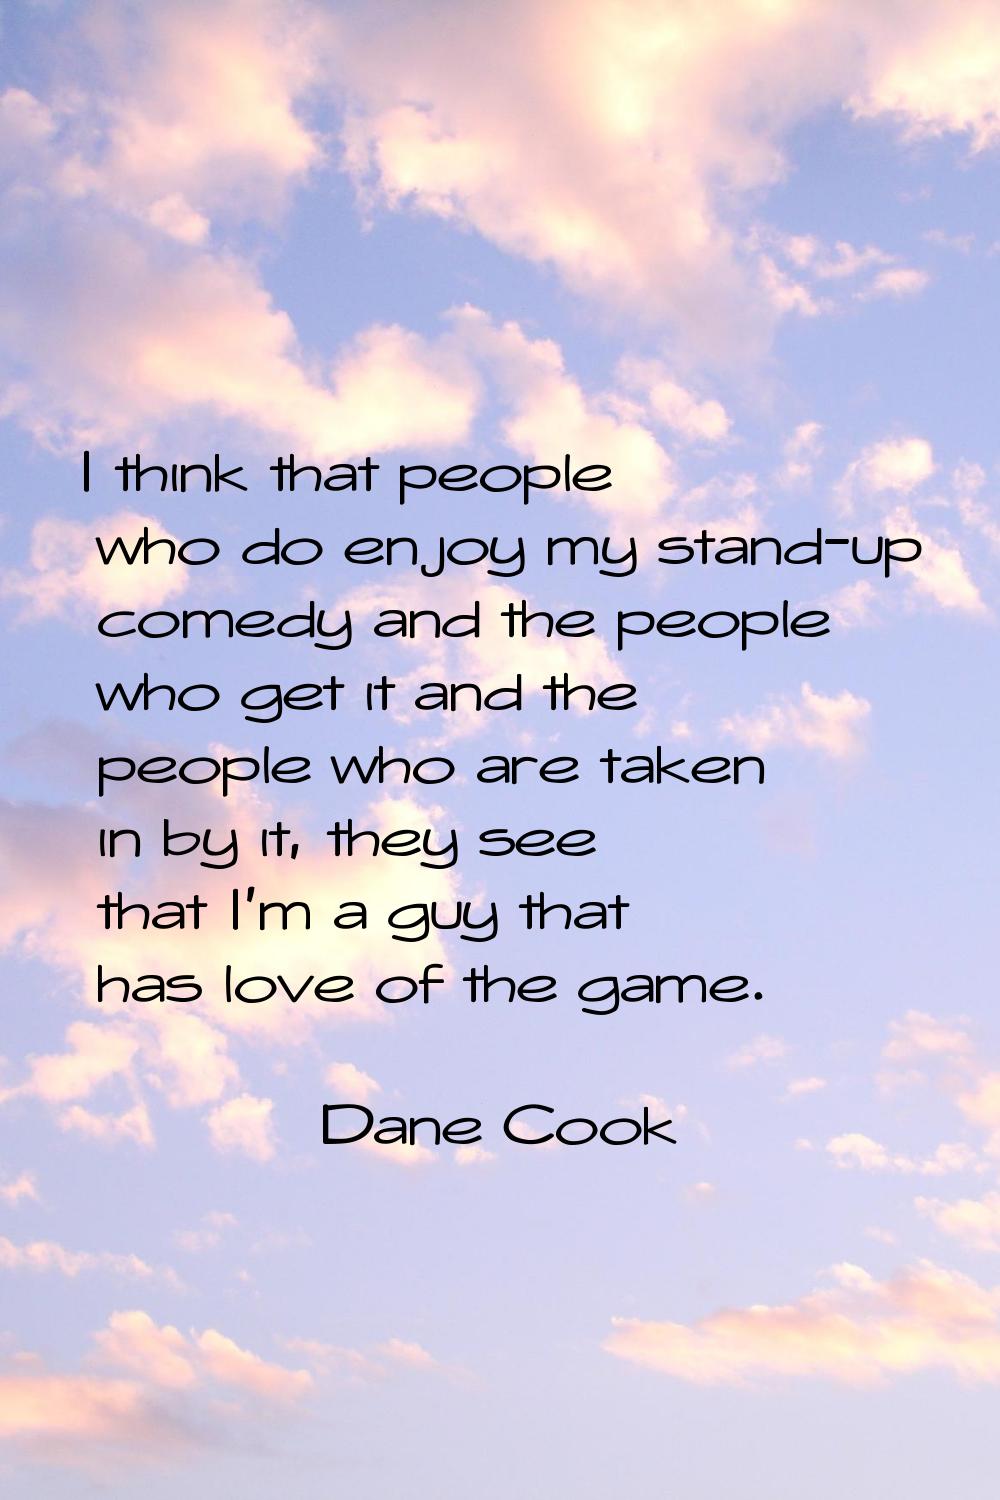 I think that people who do enjoy my stand-up comedy and the people who get it and the people who ar